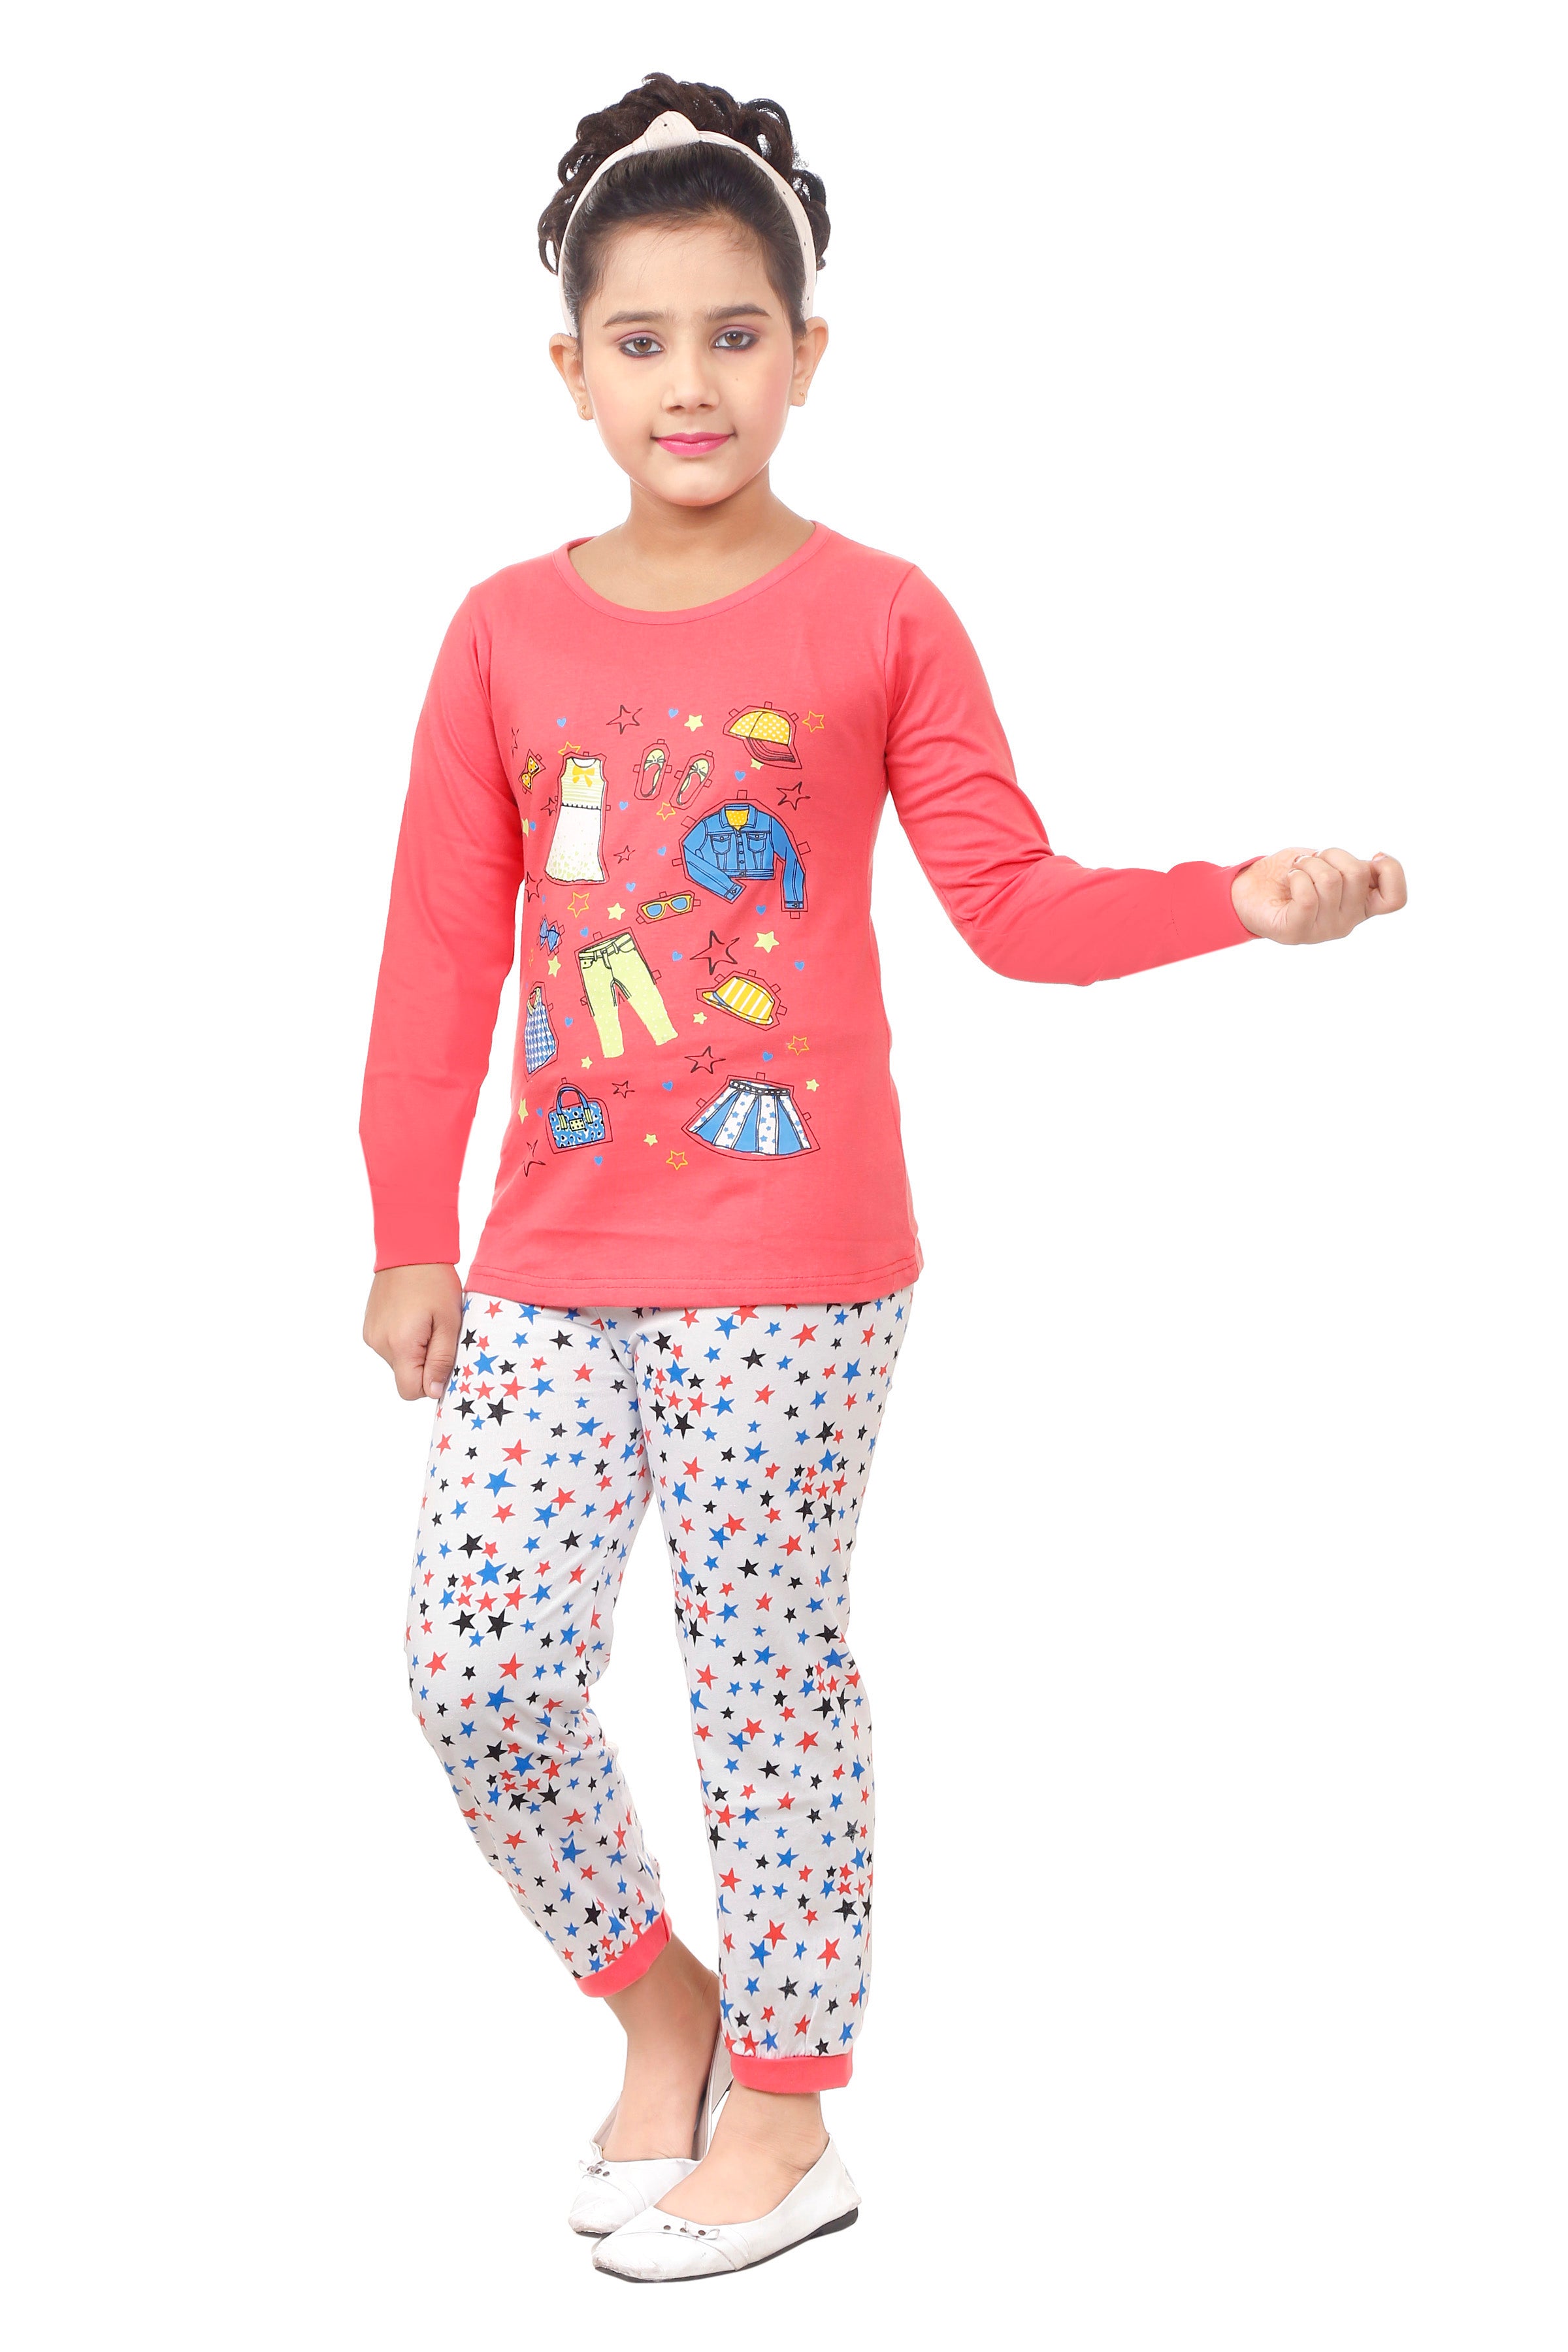 Hosiery Cotton Night Dress | Night Suits | Top and Pant Set | Stylish Dress For Girls Print